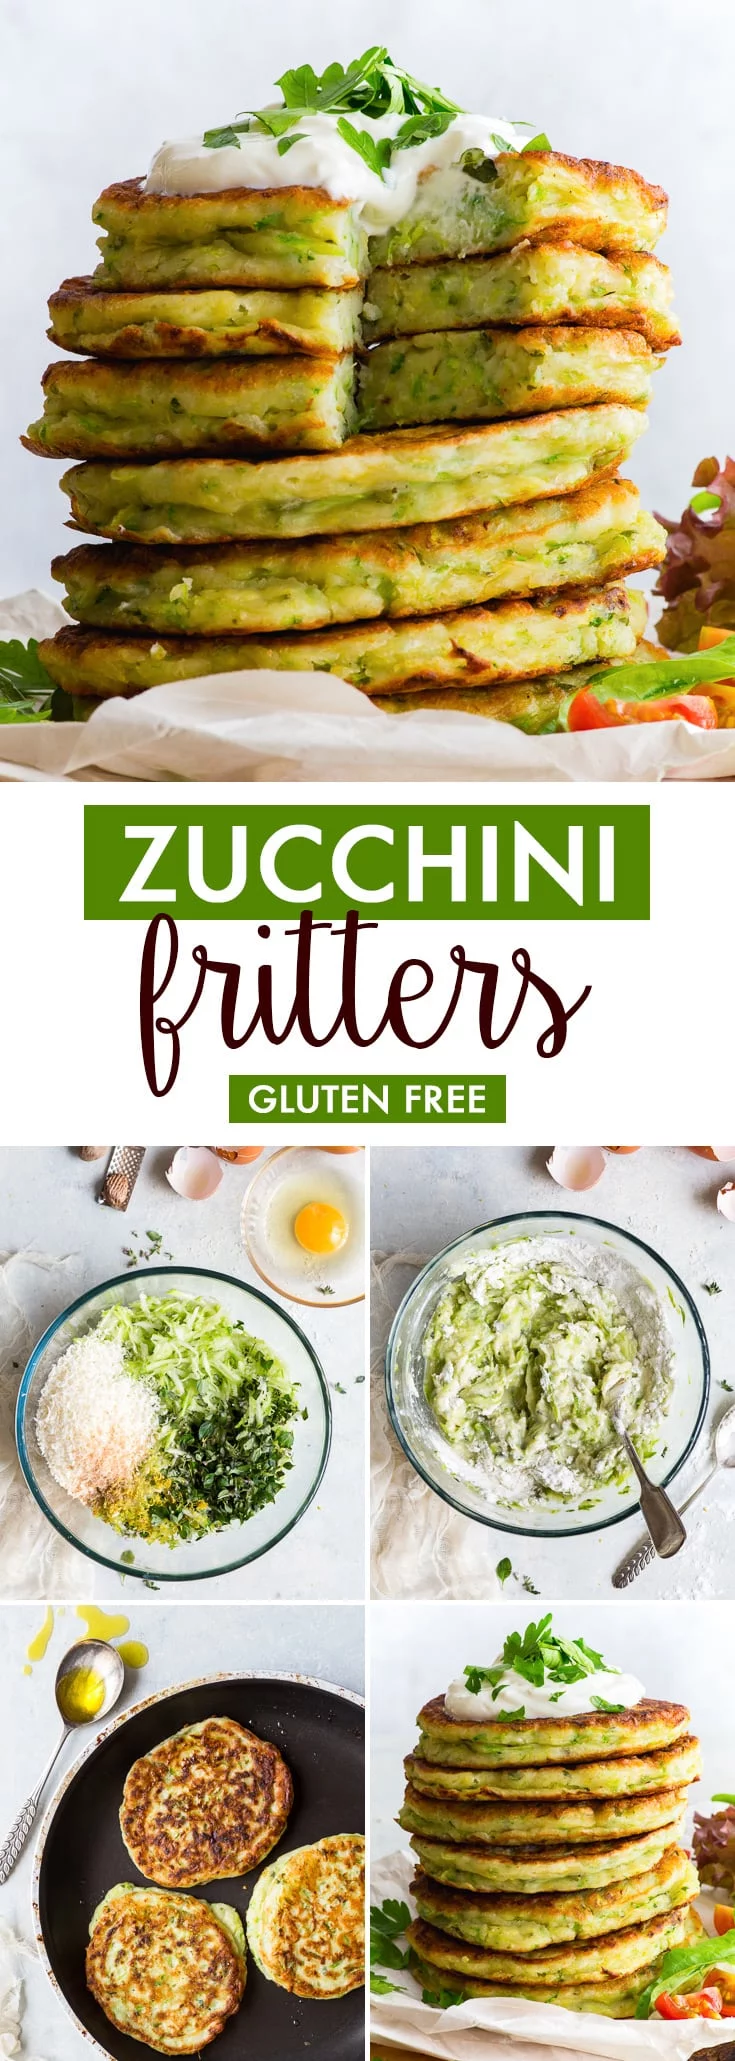 Zucchini Fritters (Gluten Free) - The Loopy Whisk -   18 healthy recipes Summer lunches ideas